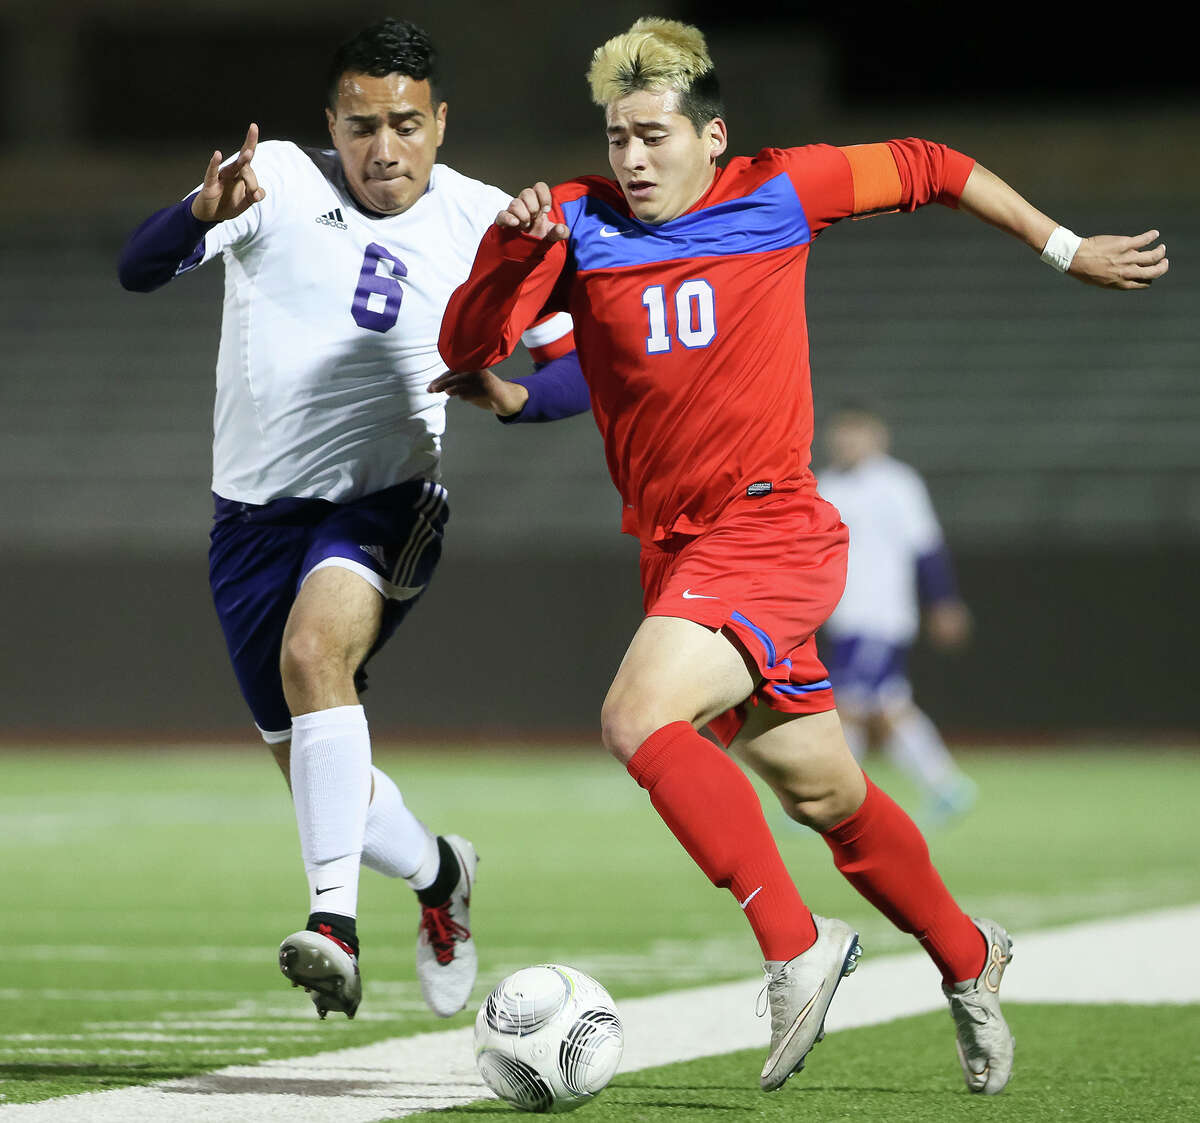 Jefferson’s John Mendoza (right) battles Brackenridge’s Oscar Vasquez for the ball during the first half of their District 28-5A game on Feb. 9.